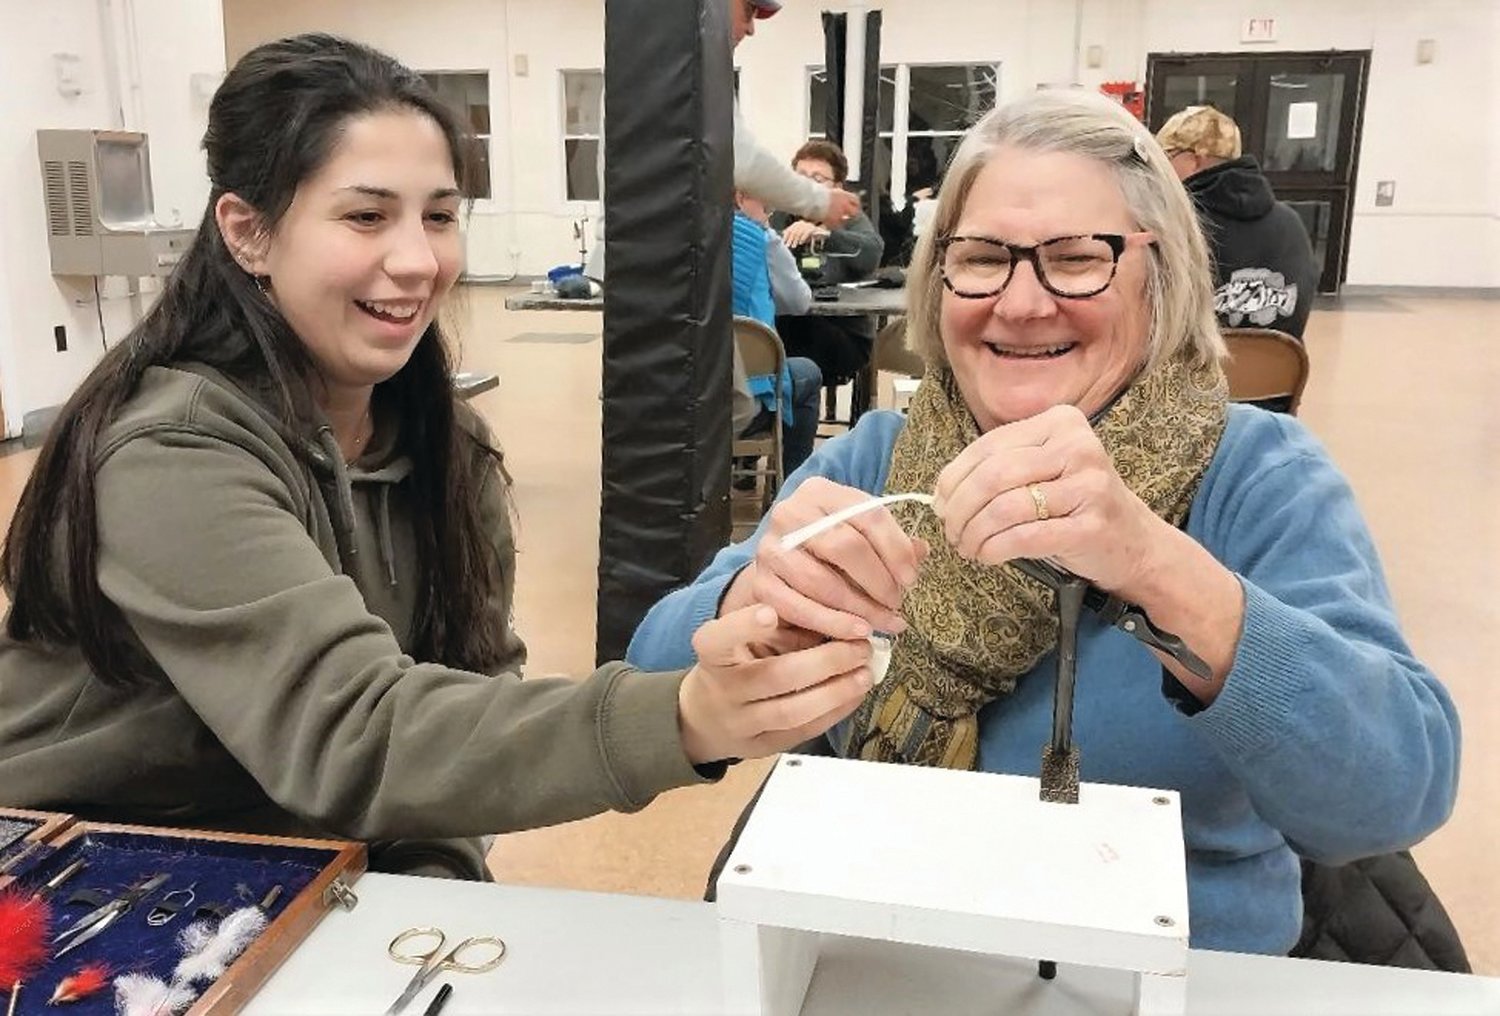 WORKSHOP: Cora Flowers, Coventry and Melisa Sullivan, Wakefield share a fun moment at DEM’s fly tying program offered Monday evenings. Visit https://dem.ri.gov/events/fall-fly-tying-workshop. (Submitted photos)